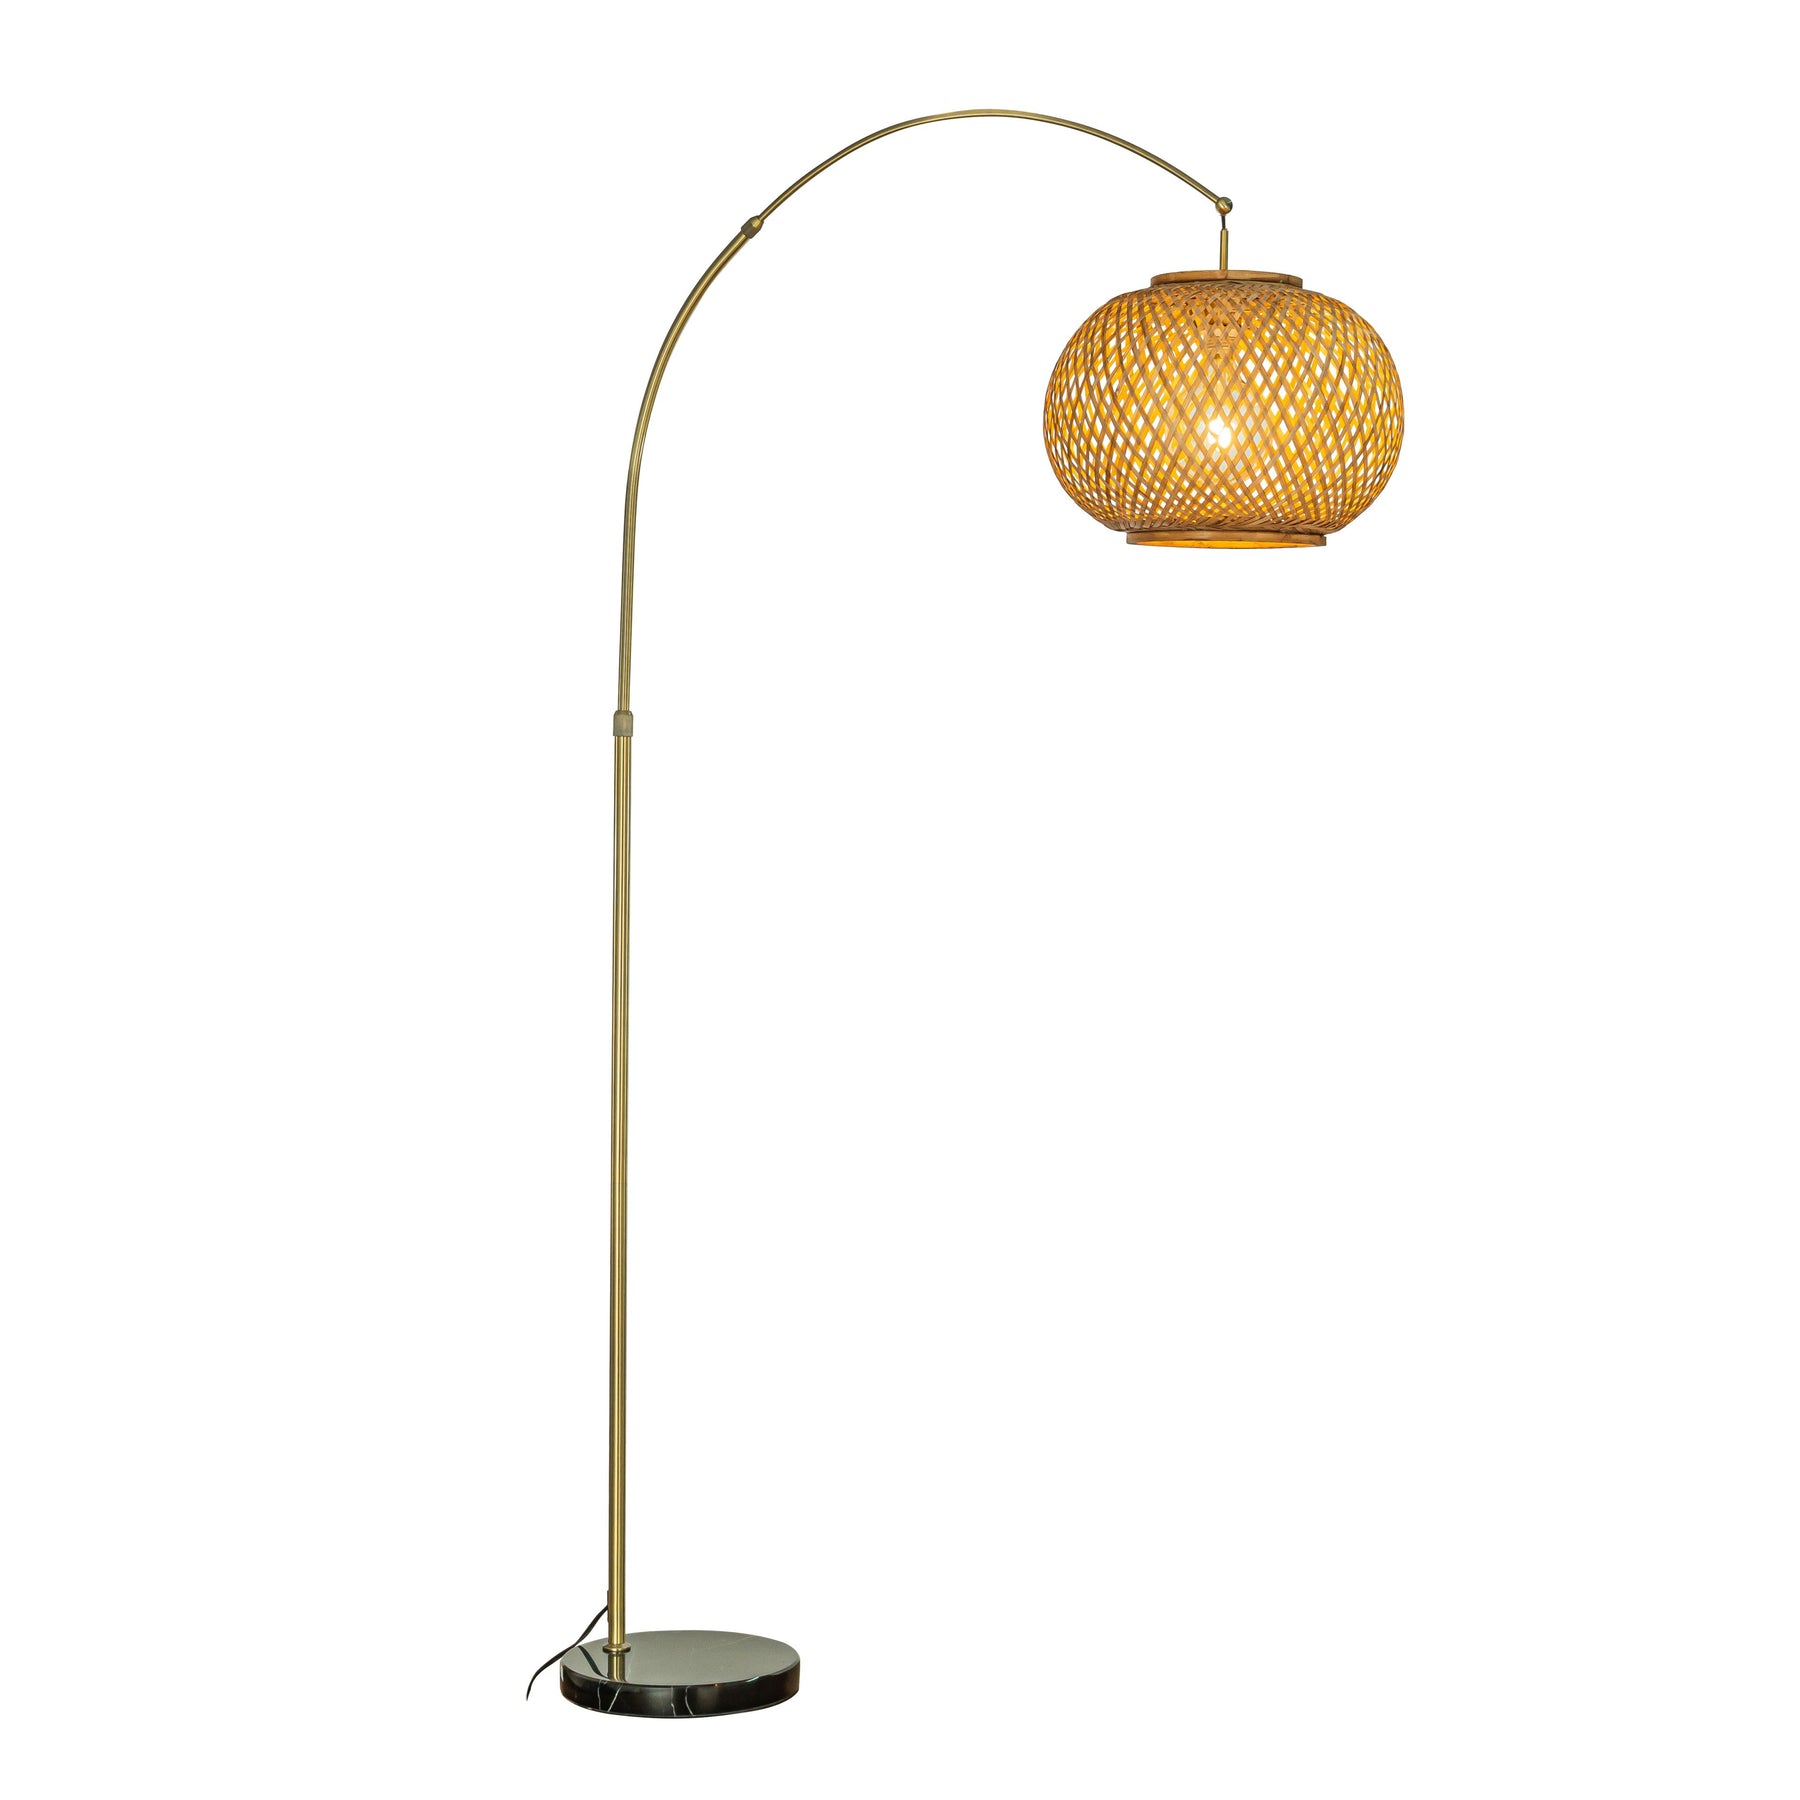 75" Bronze Arc Floor Lamp with Hand-woven Bamboo Shade and Marble Base